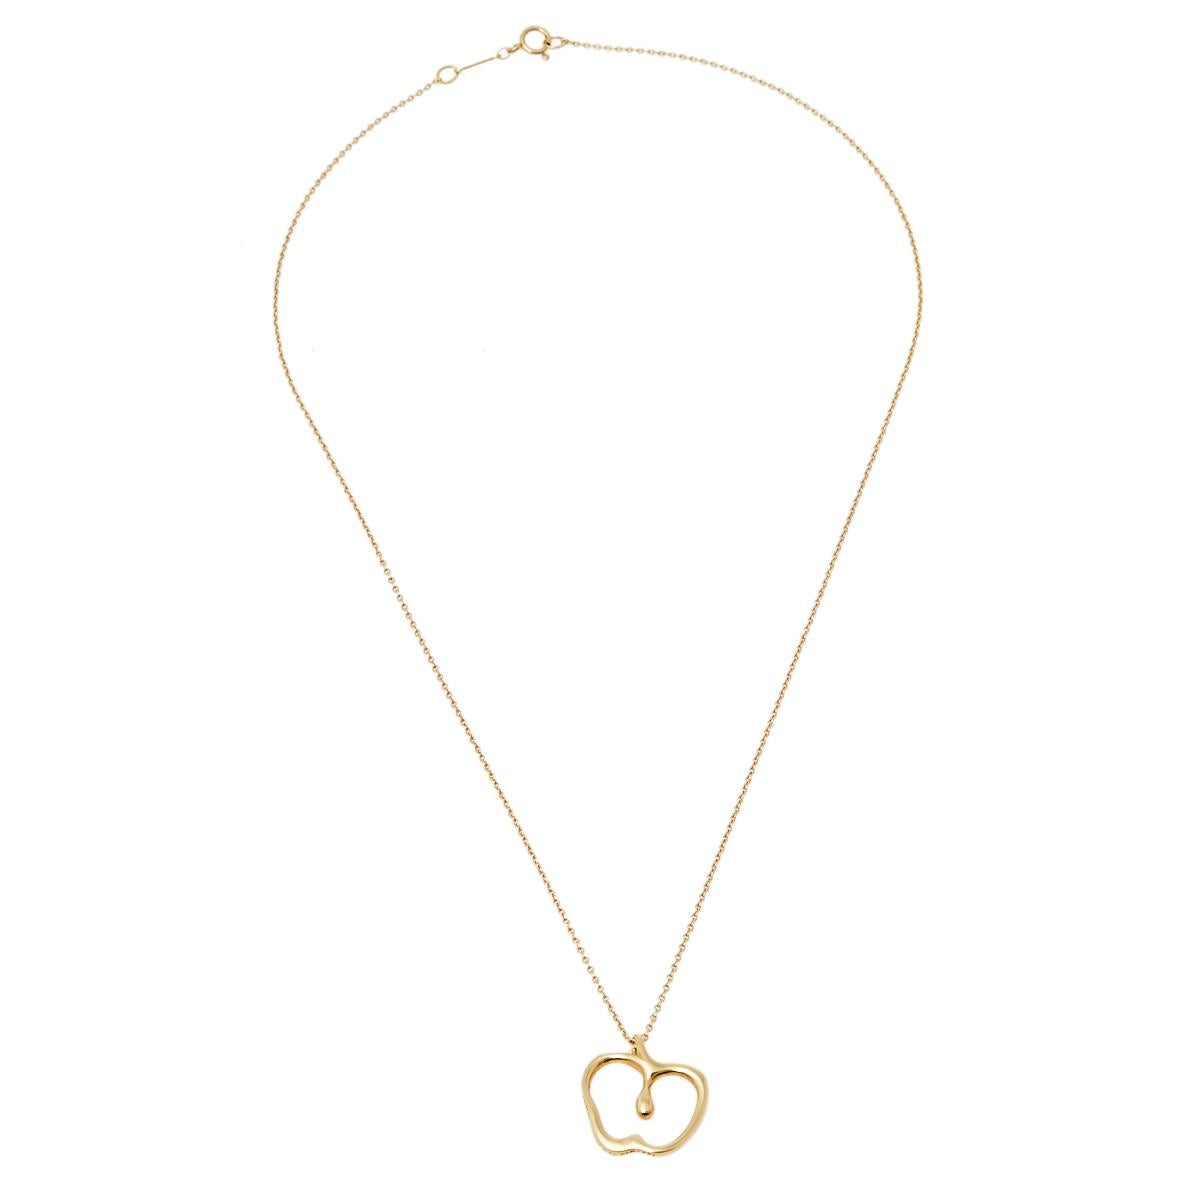 Tiffany & Co. presents this stunning necklace that will brighten up your look every day. It features an 18k yellow gold pendant designed to resemble an apple. This Elsa Peretti creation is a perfect buy for a collector. The pendant is secured with a